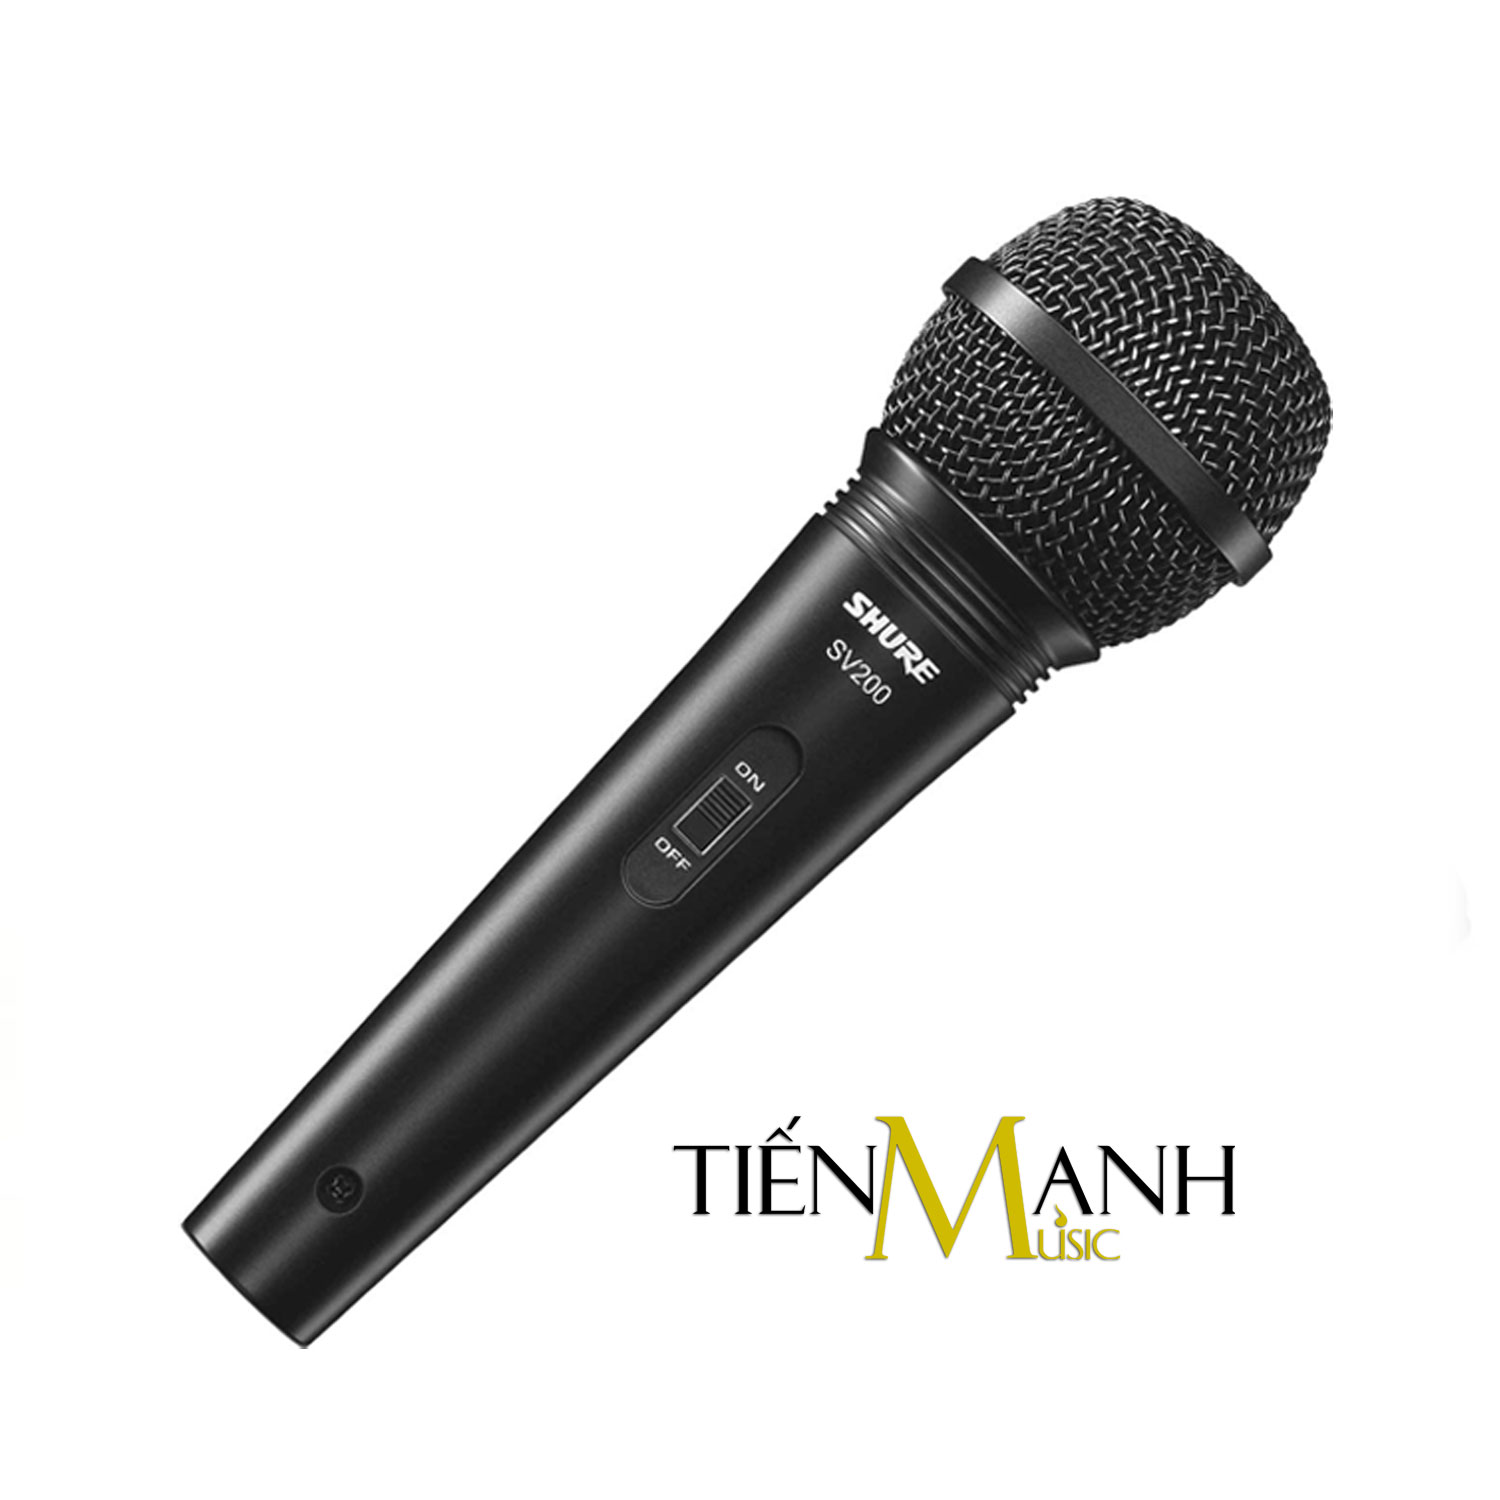 Cach-Su-Dung-Mic-Shure-SV200-Co-Day-Cam-Tay-Vocal-Microphone-Karaoke.jpg